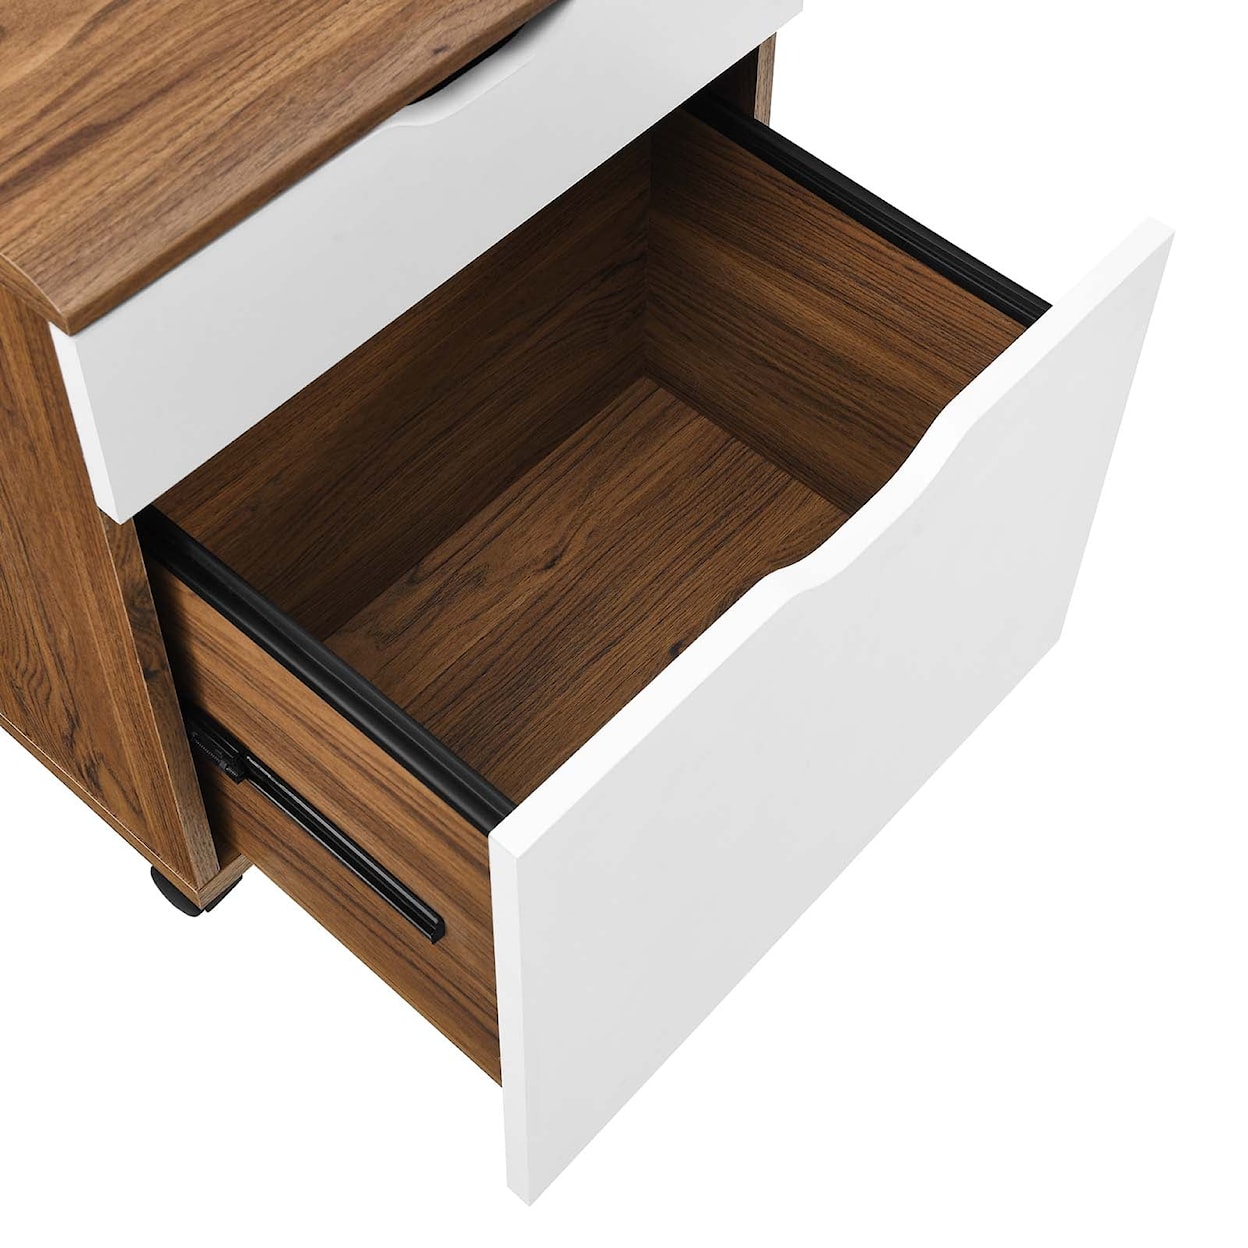 Modway Envision Wood File Cabinet